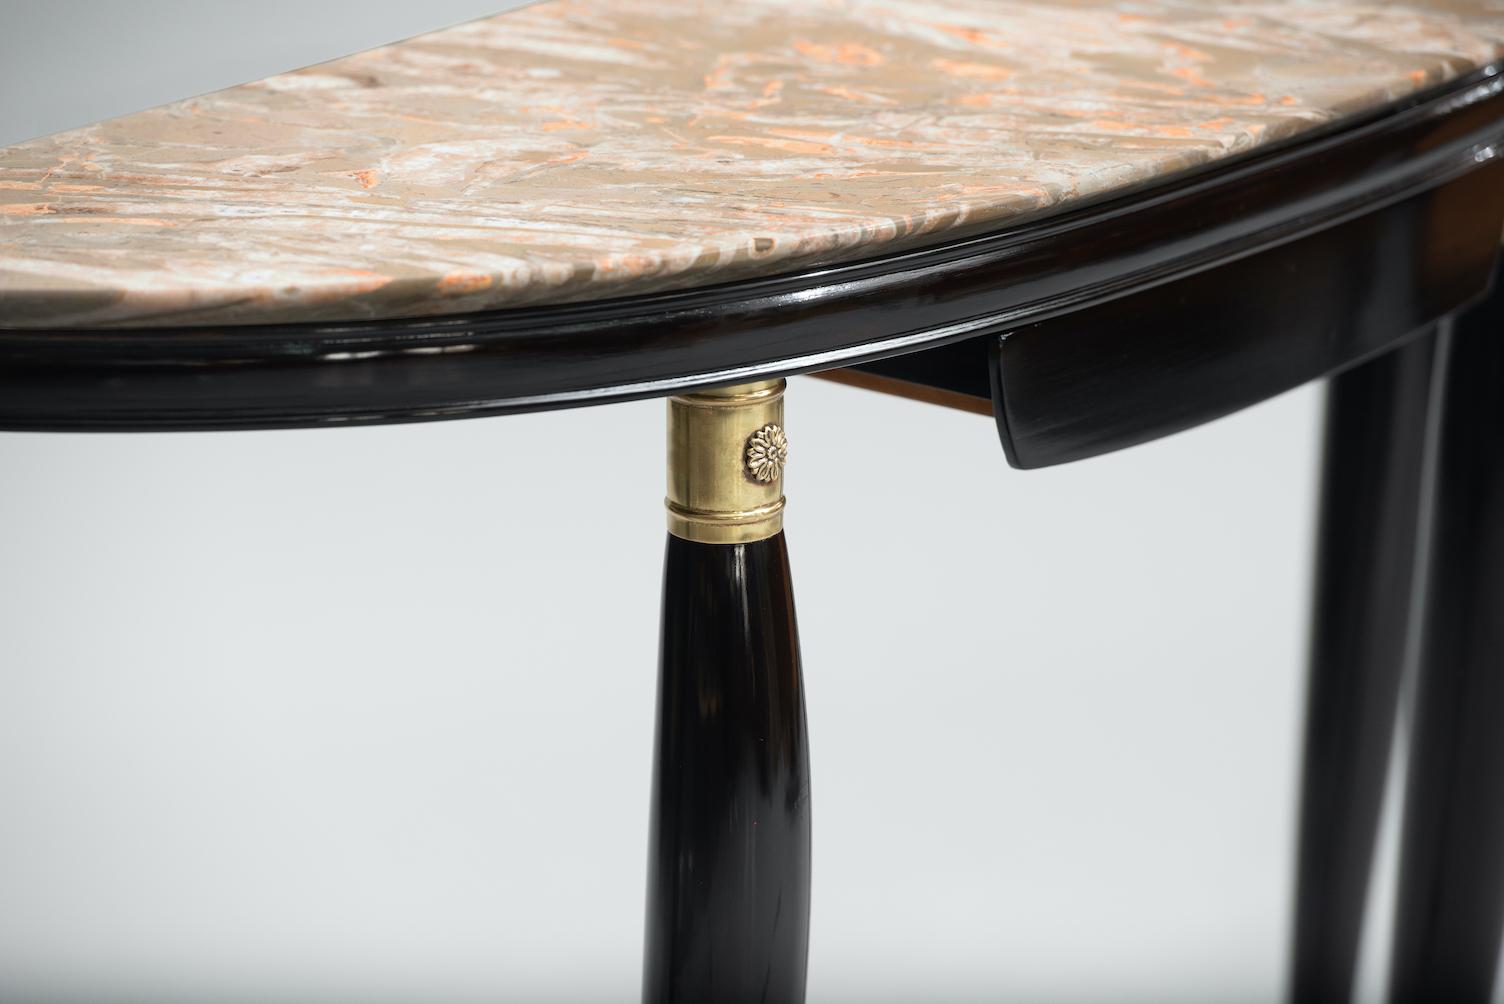 Italian Mid-Century Modern Marble-Top Console attributed to Paolo Buffa, circa 1948